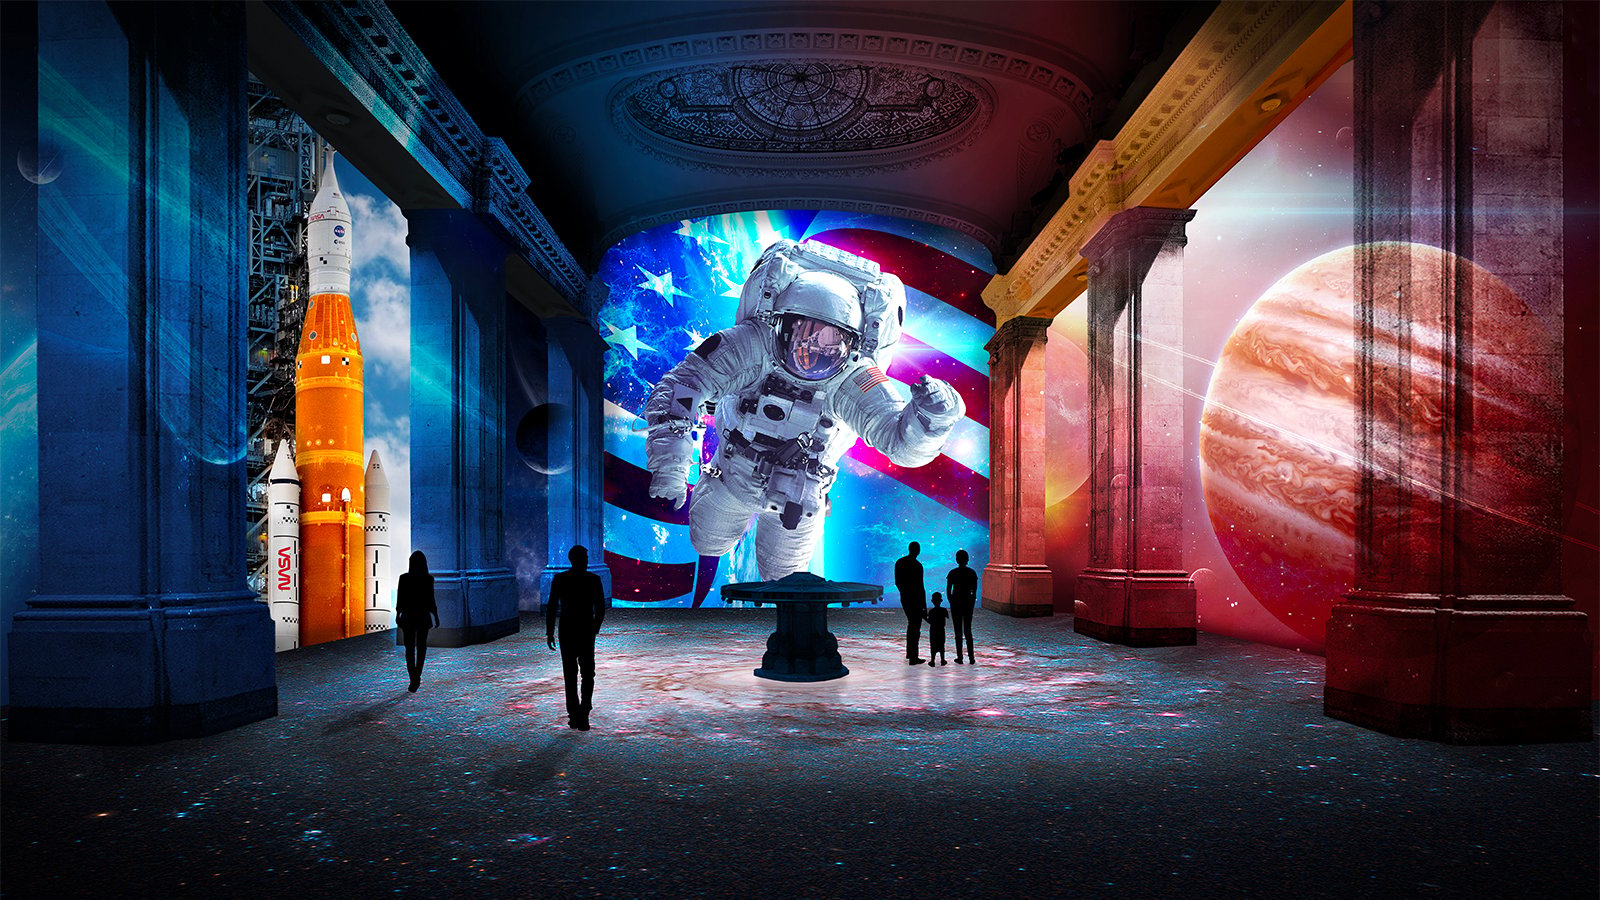 Destination Cosmos The Immersive Space ExperienceHall des LumieresNew York City